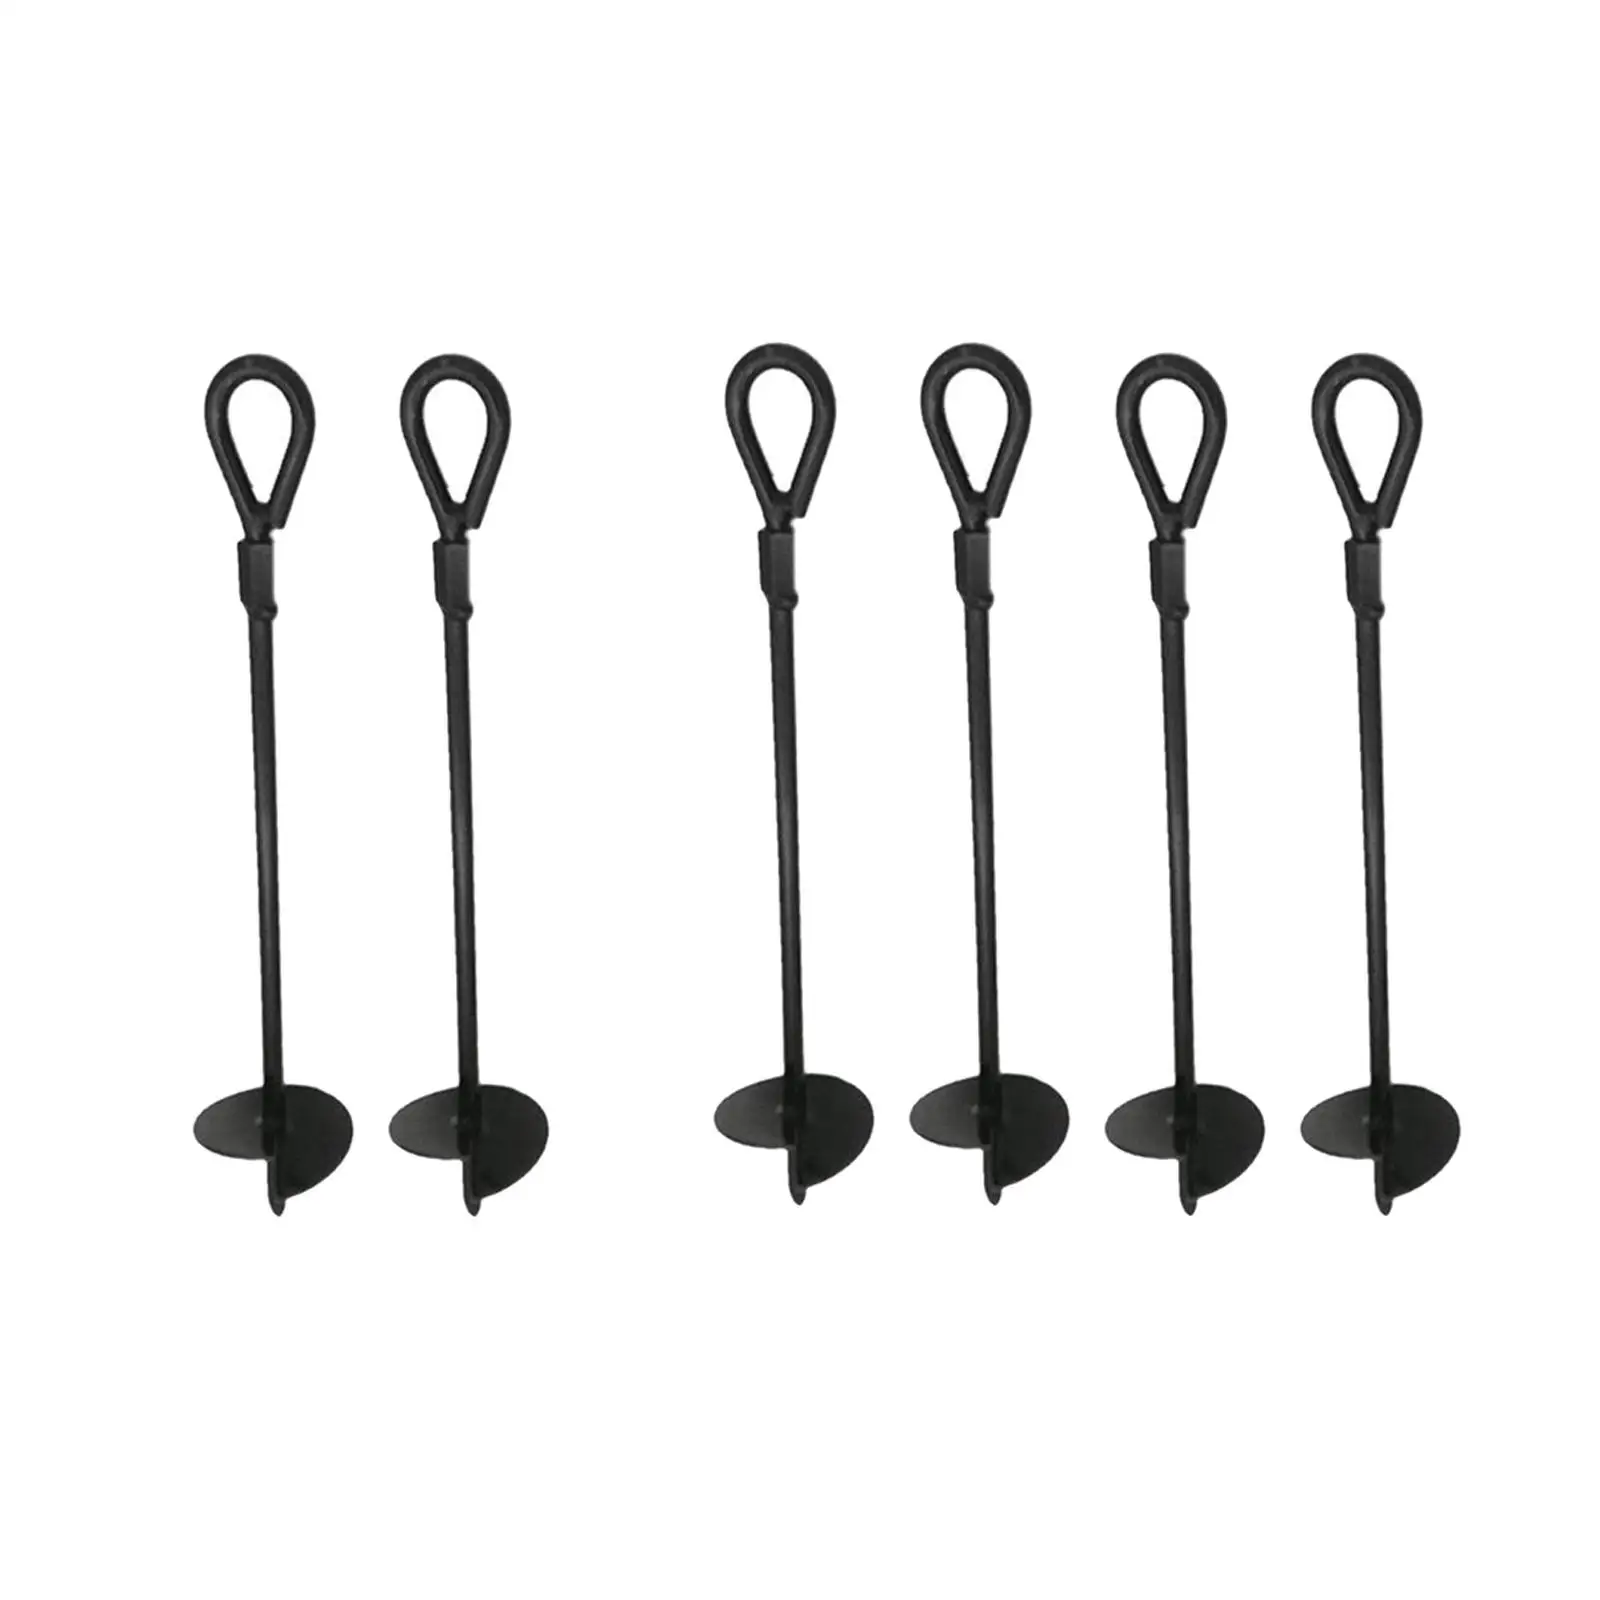 Ground Anchor Protection Frame Stake Fixed Tent for Tents Canopies Hiking